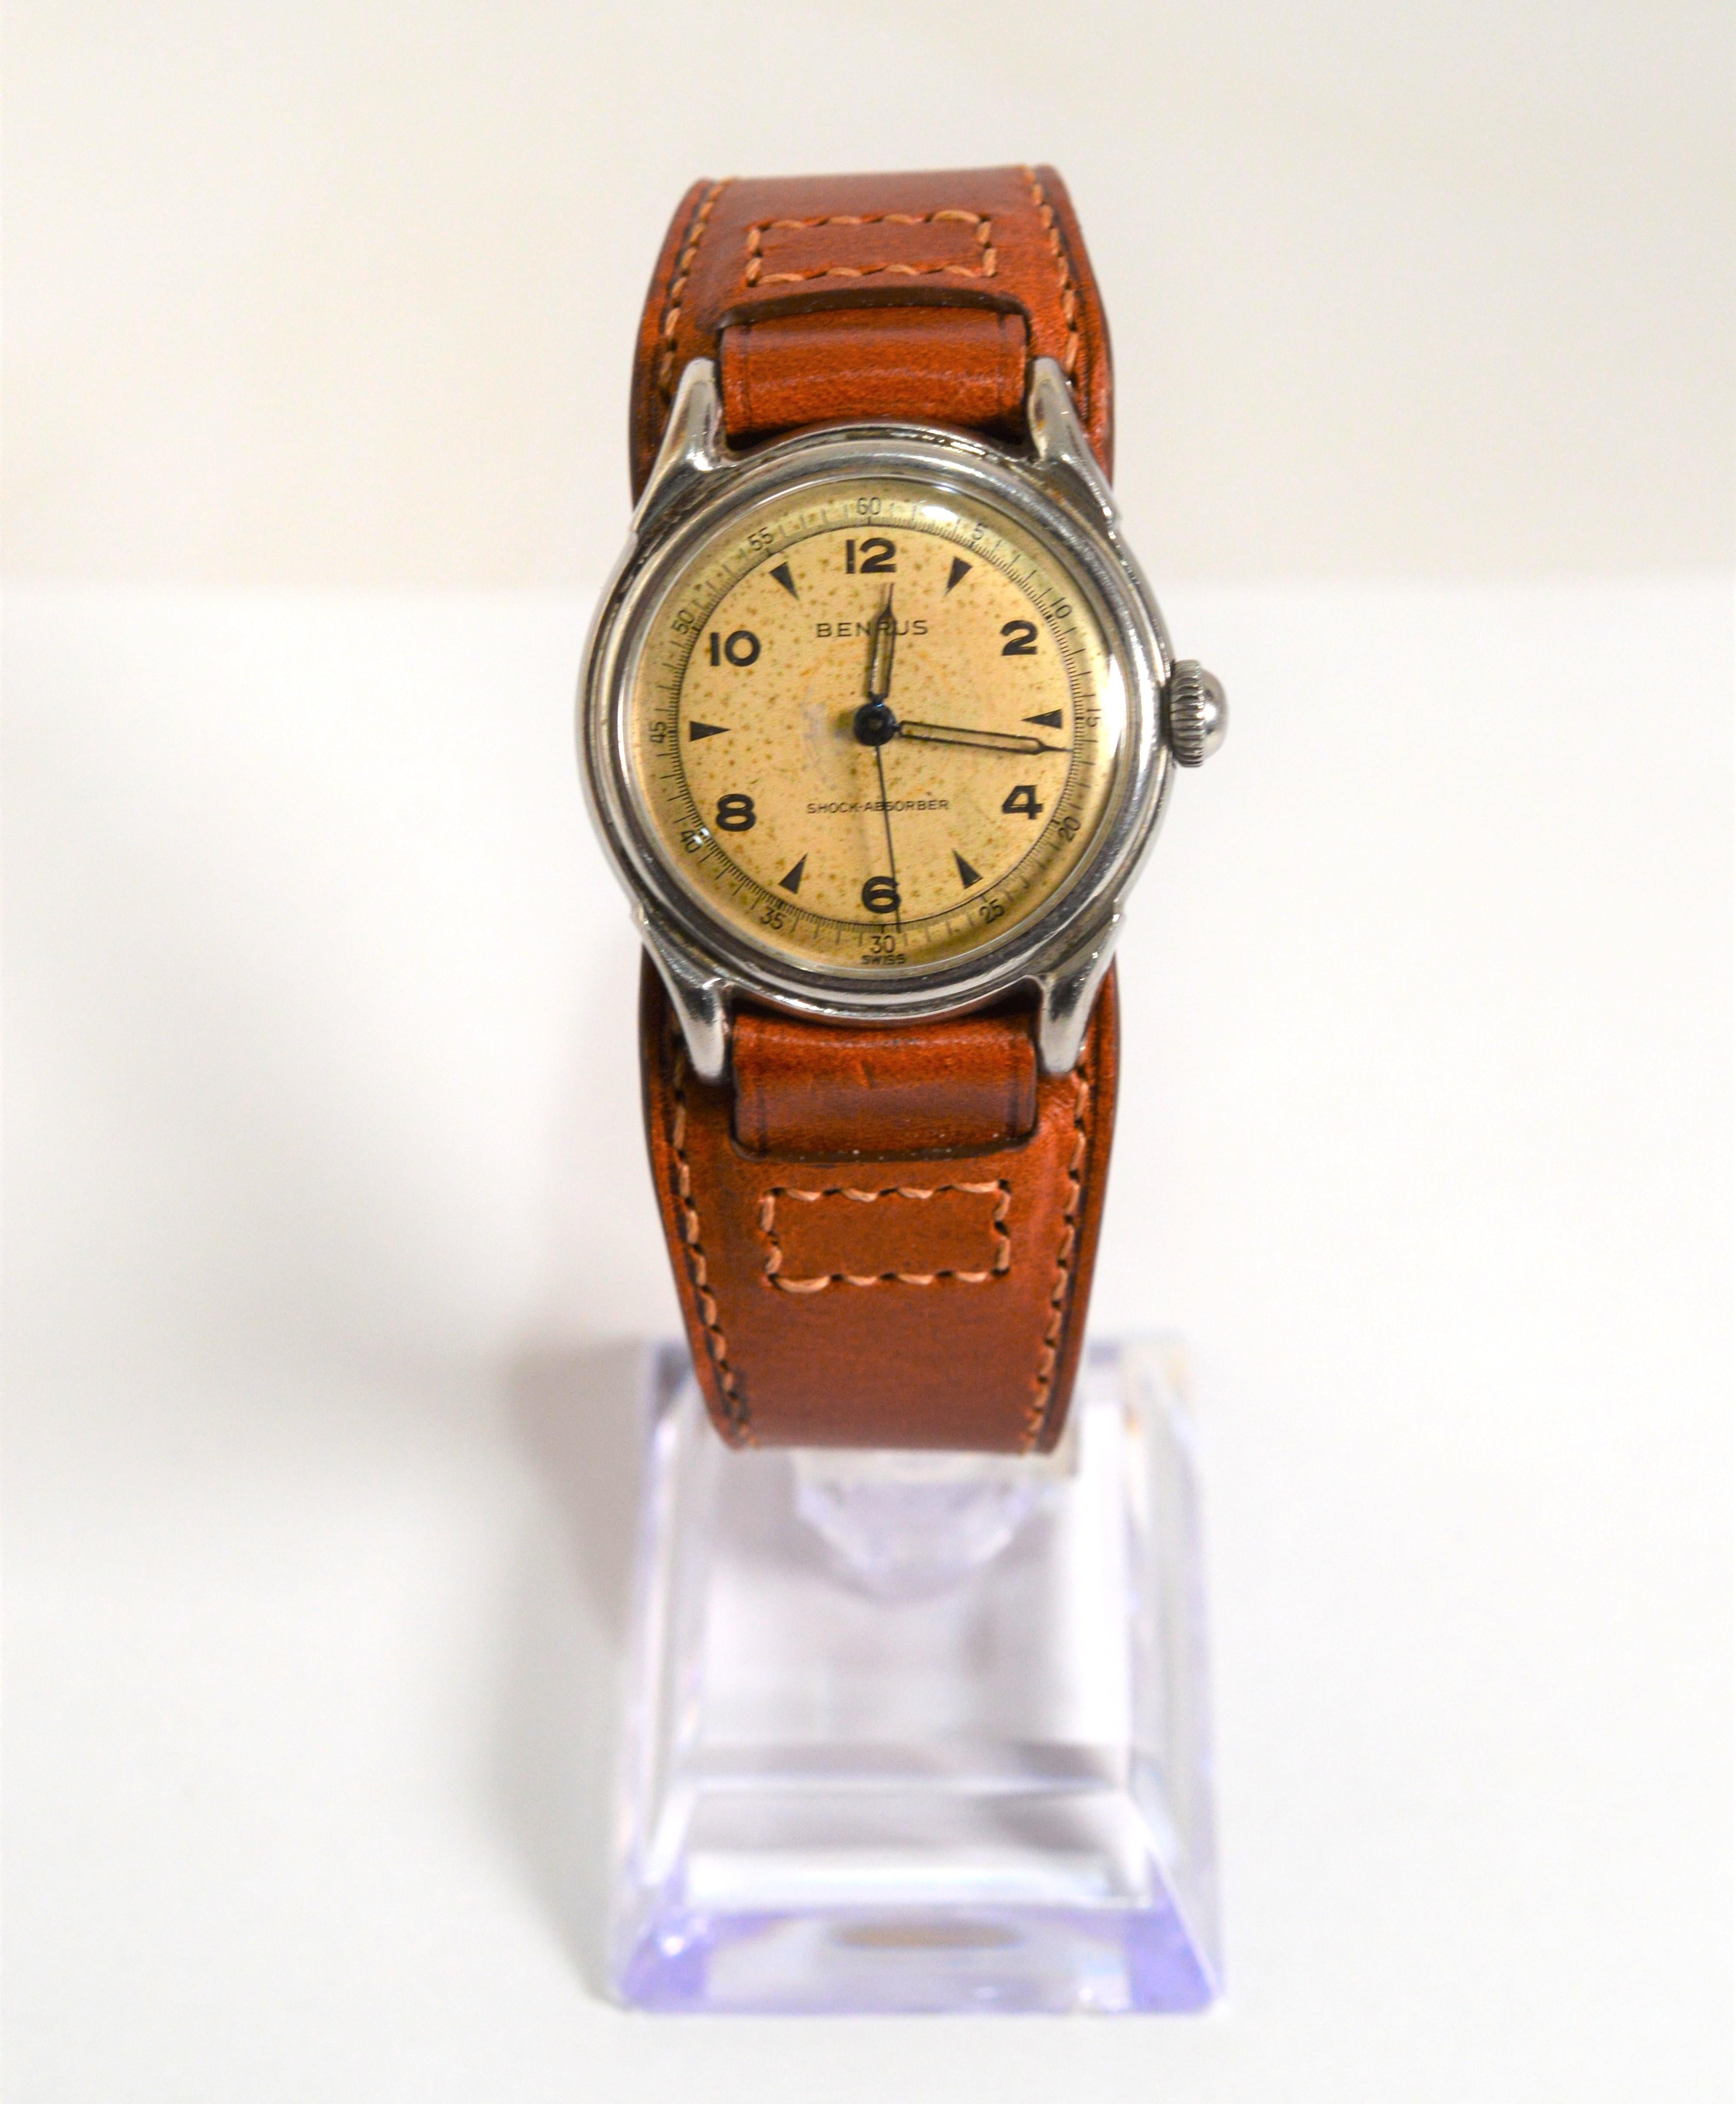 Vintage Benrus Military Style Wrist Watch with Leather Bund Strap In Good Condition For Sale In Mount Kisco, NY